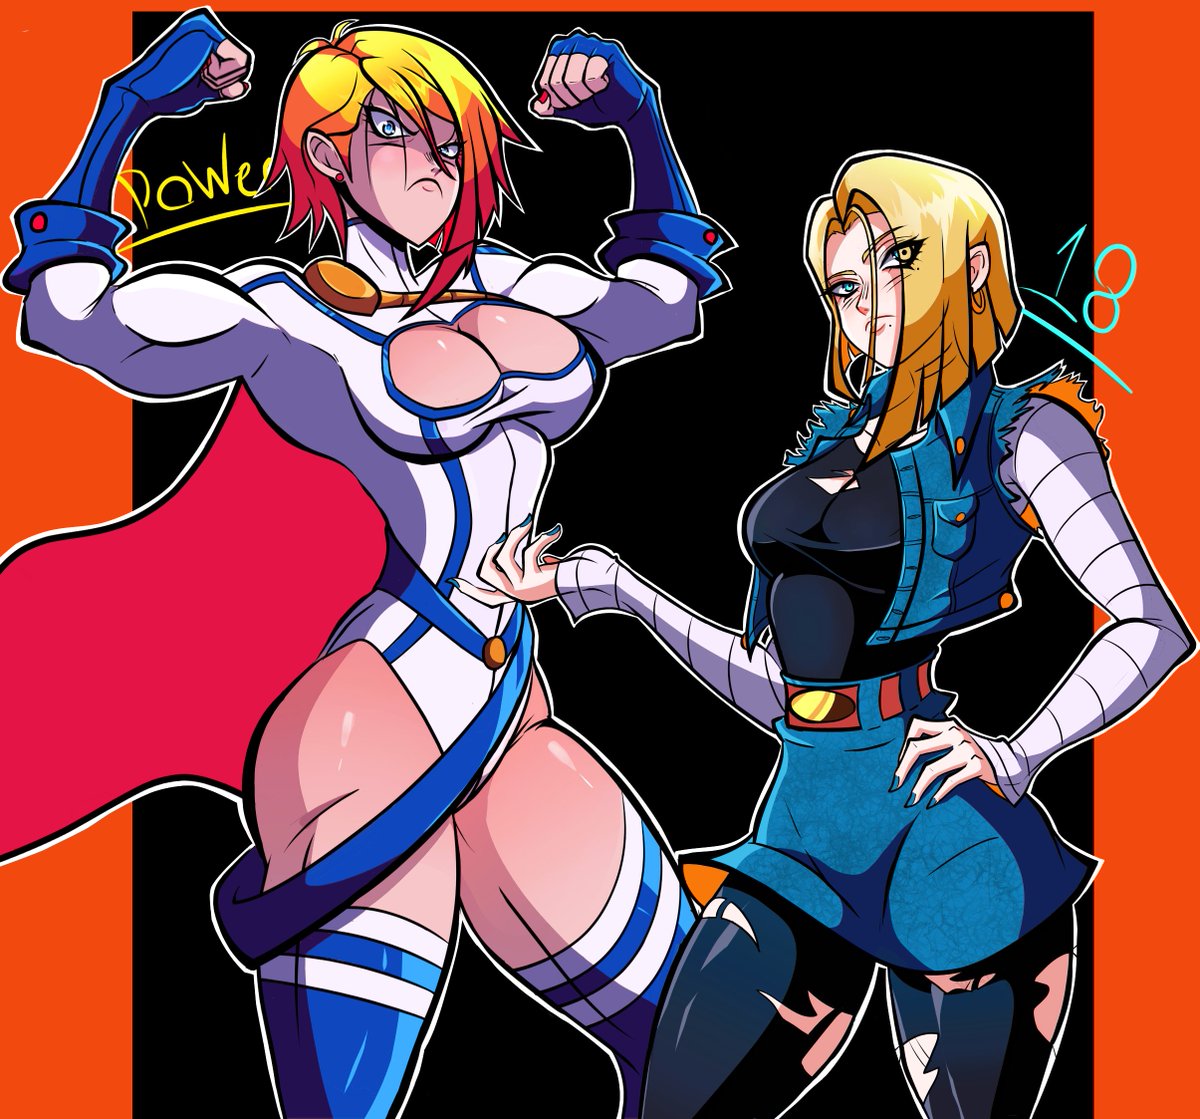 Super Blondes type beat
Android 18 and Powergirl #Android18 #PowerGirl   #DragonBall